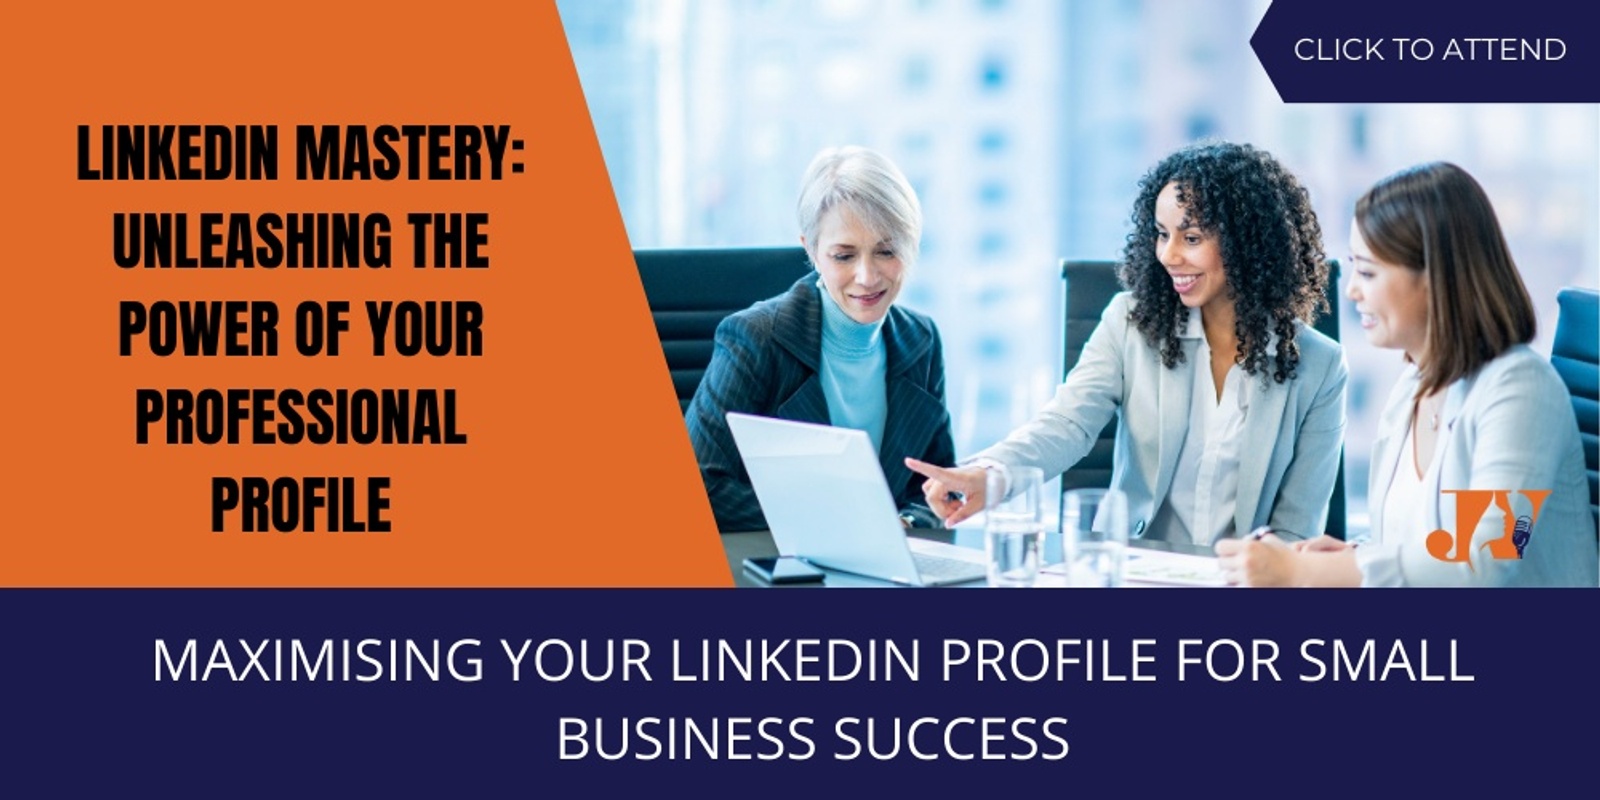 Banner image for LinkedIn Mastery: Unleashing the Power of Your Professional Profile